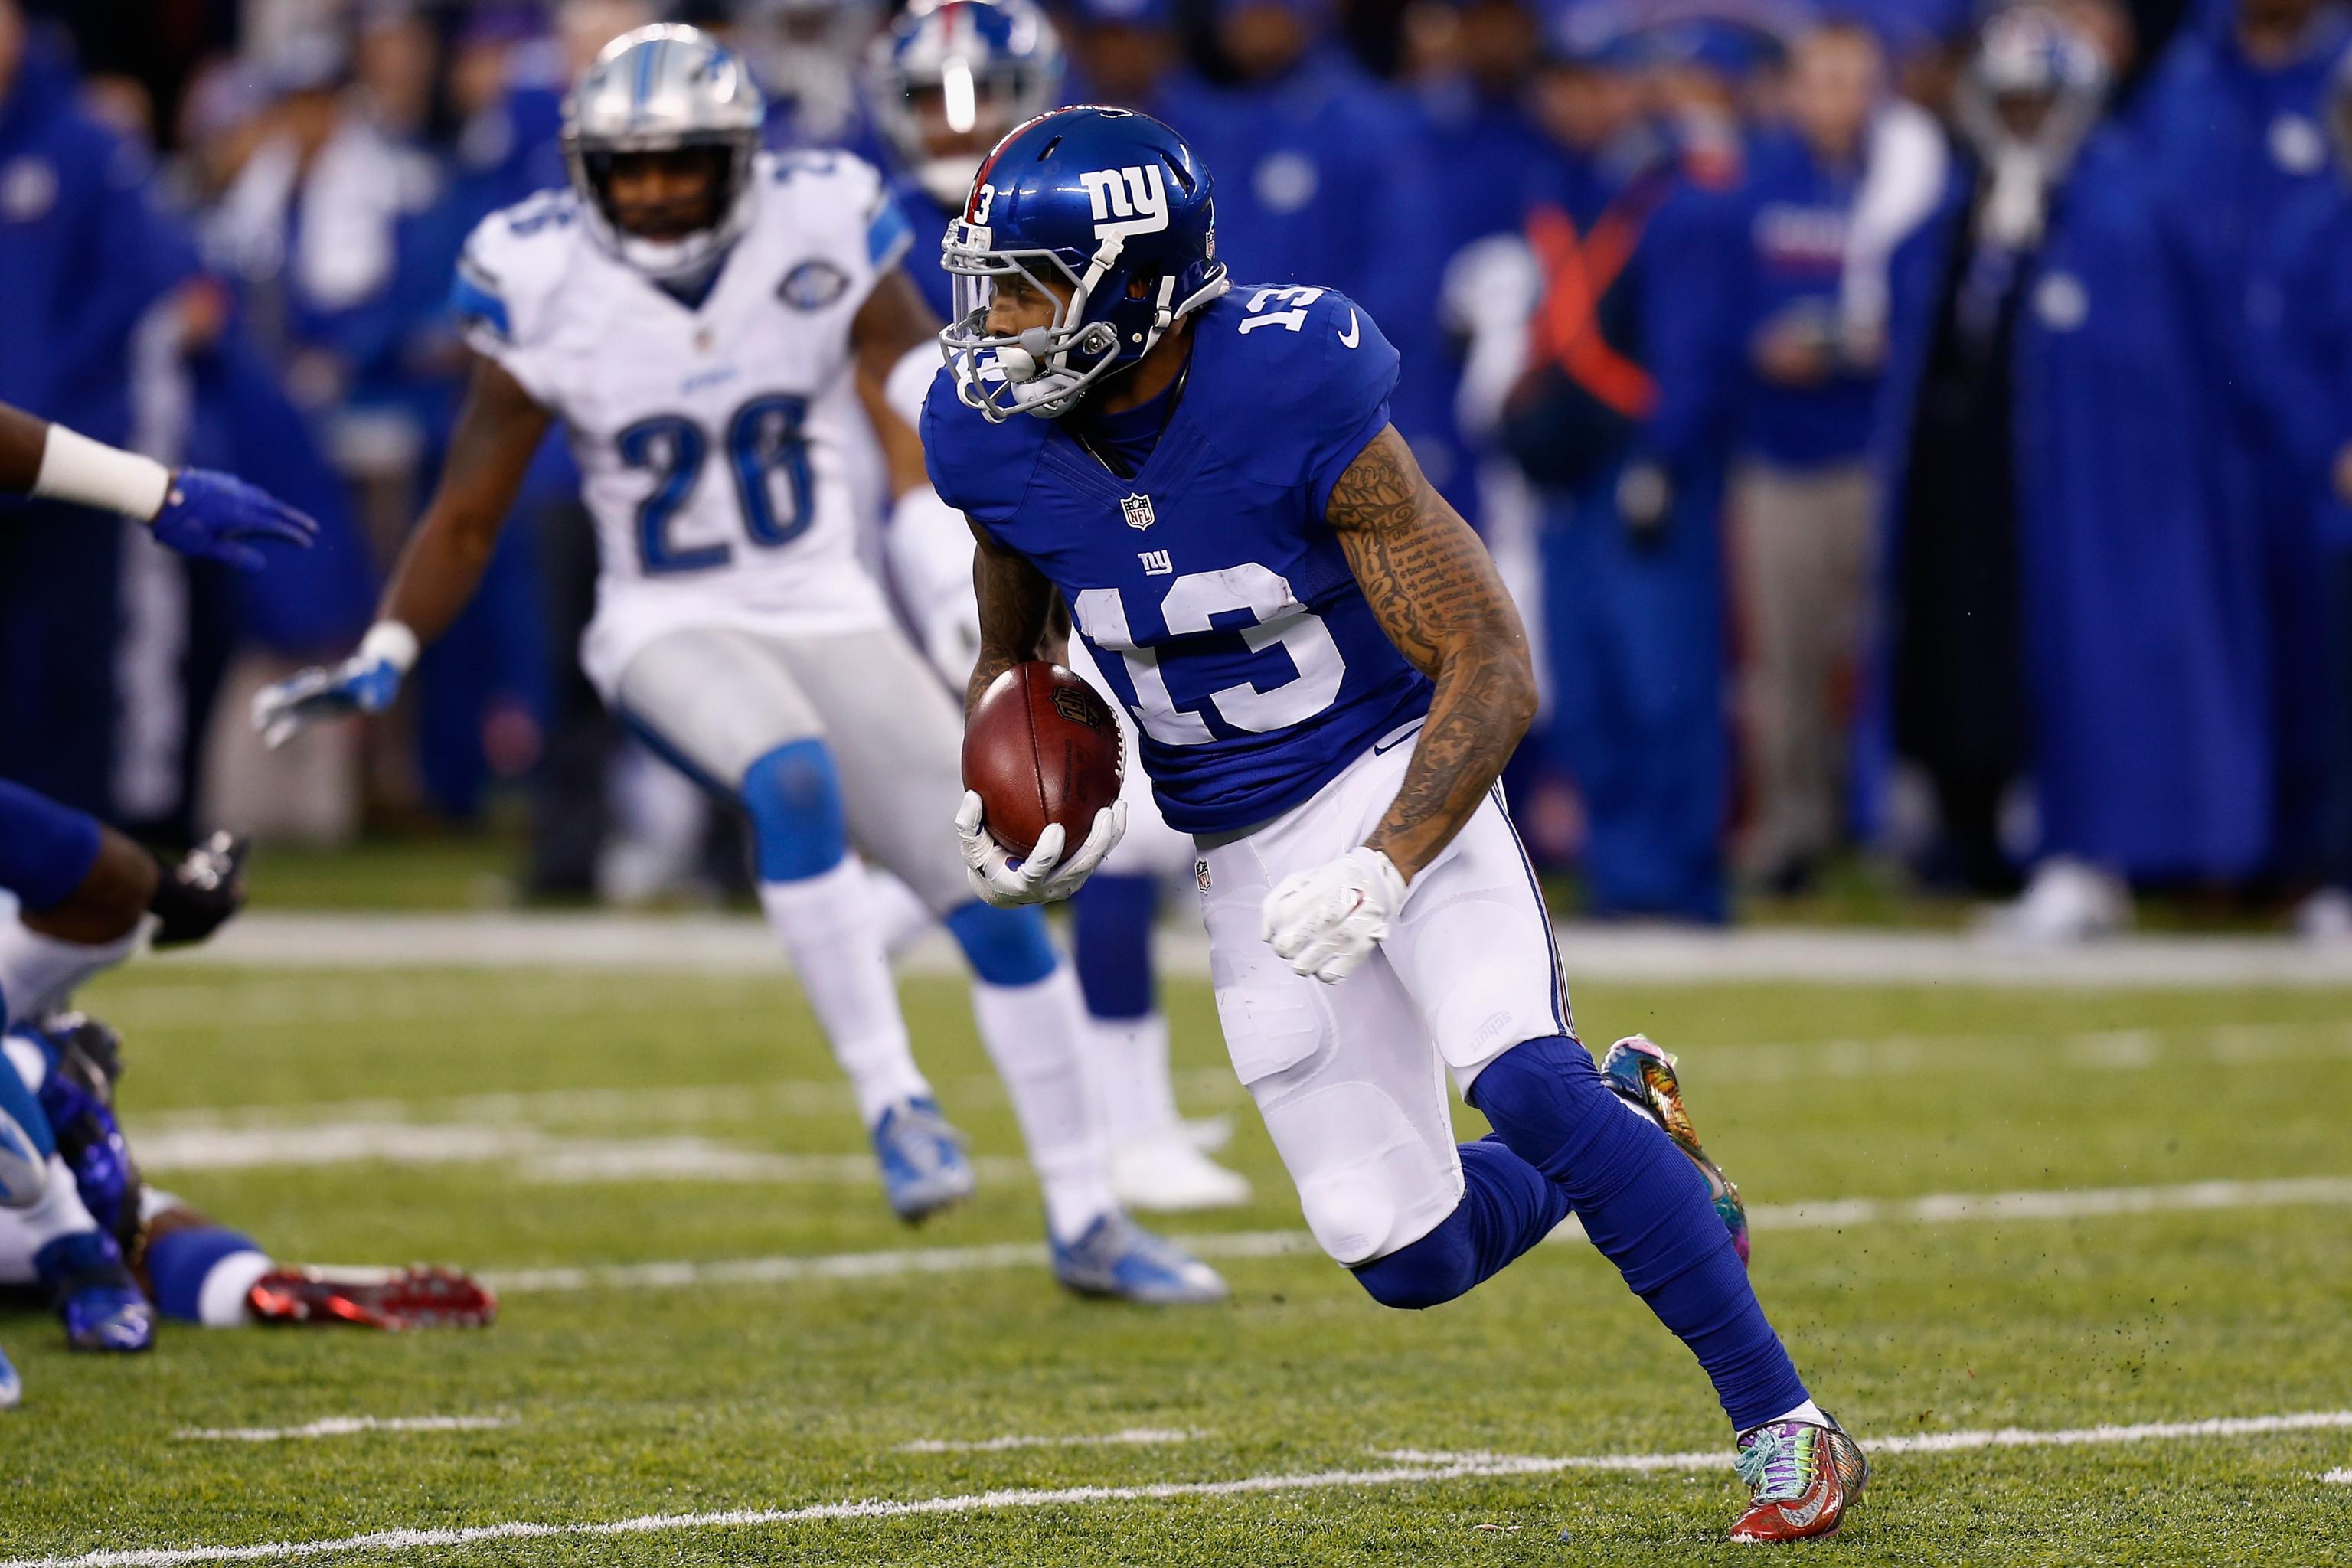 Odell Beckham Jr. shows off special cleats ahead of NFL Pro-Bowl (Photos)